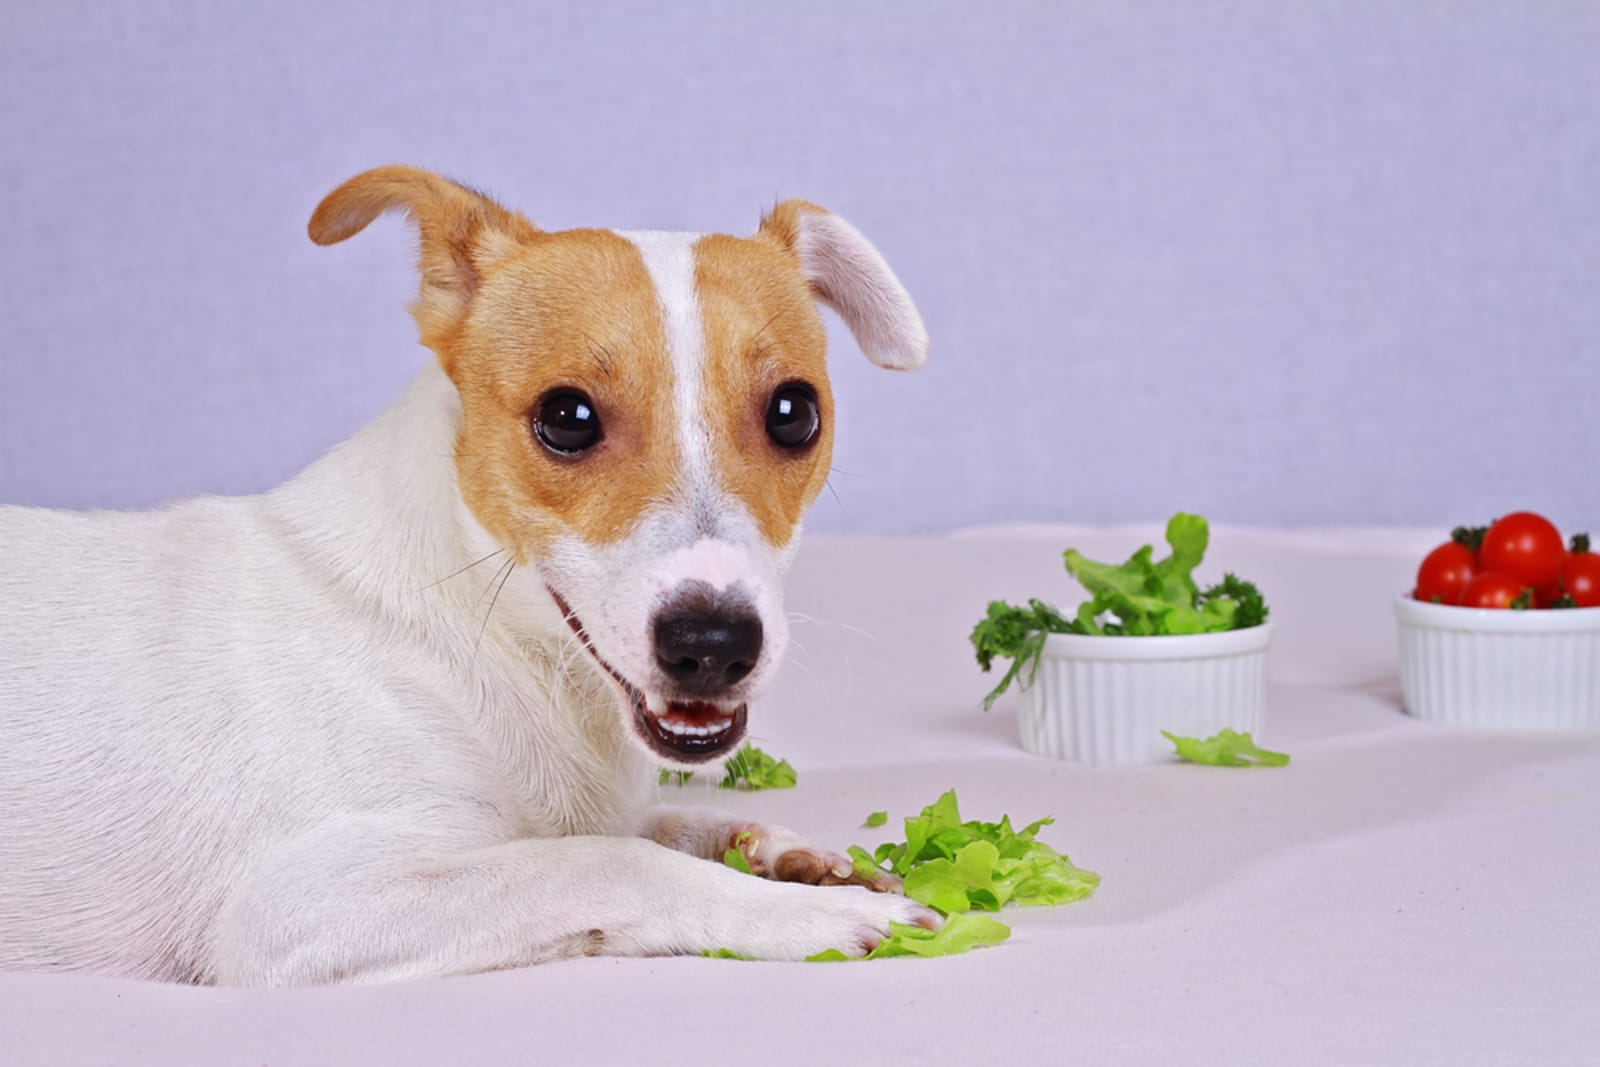 A dog enjoying a bowl of vegetables and salad